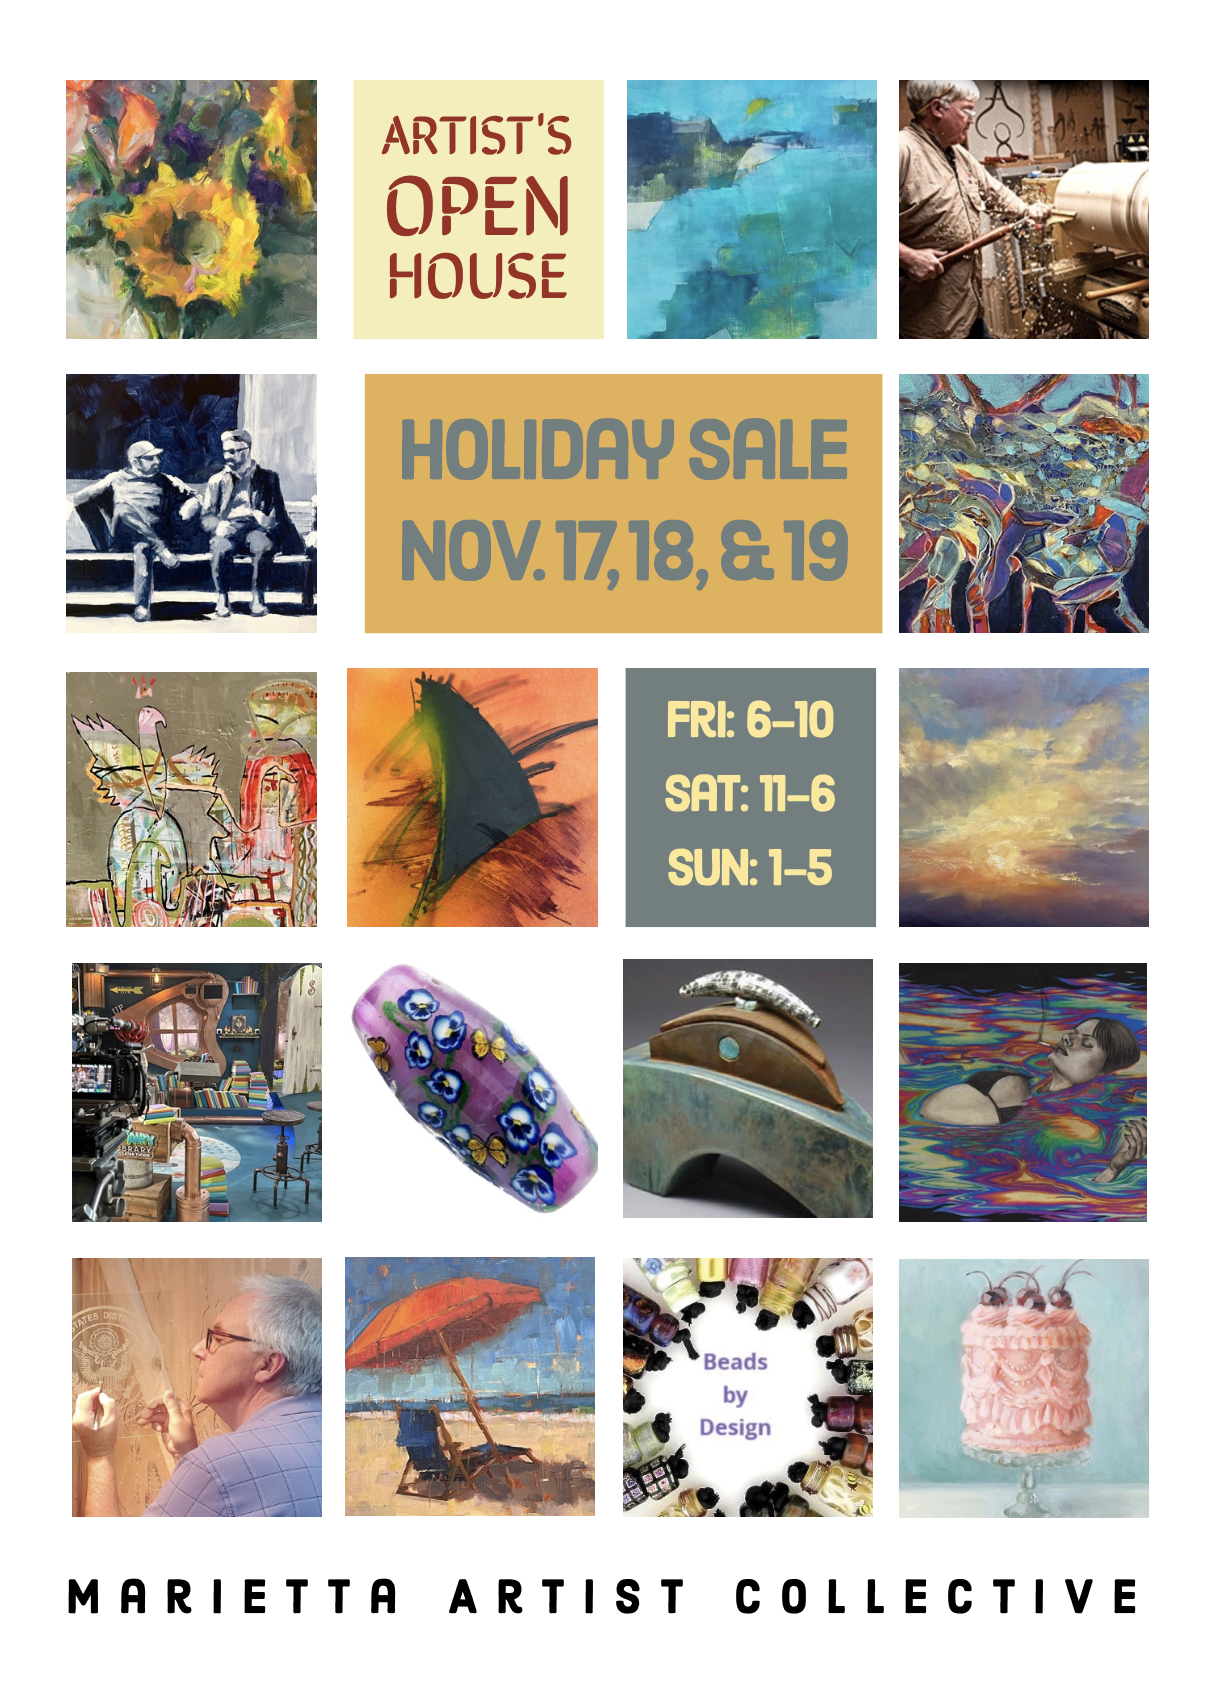 Marietta Artist Collective 3 Day Holiday Open House and Sale